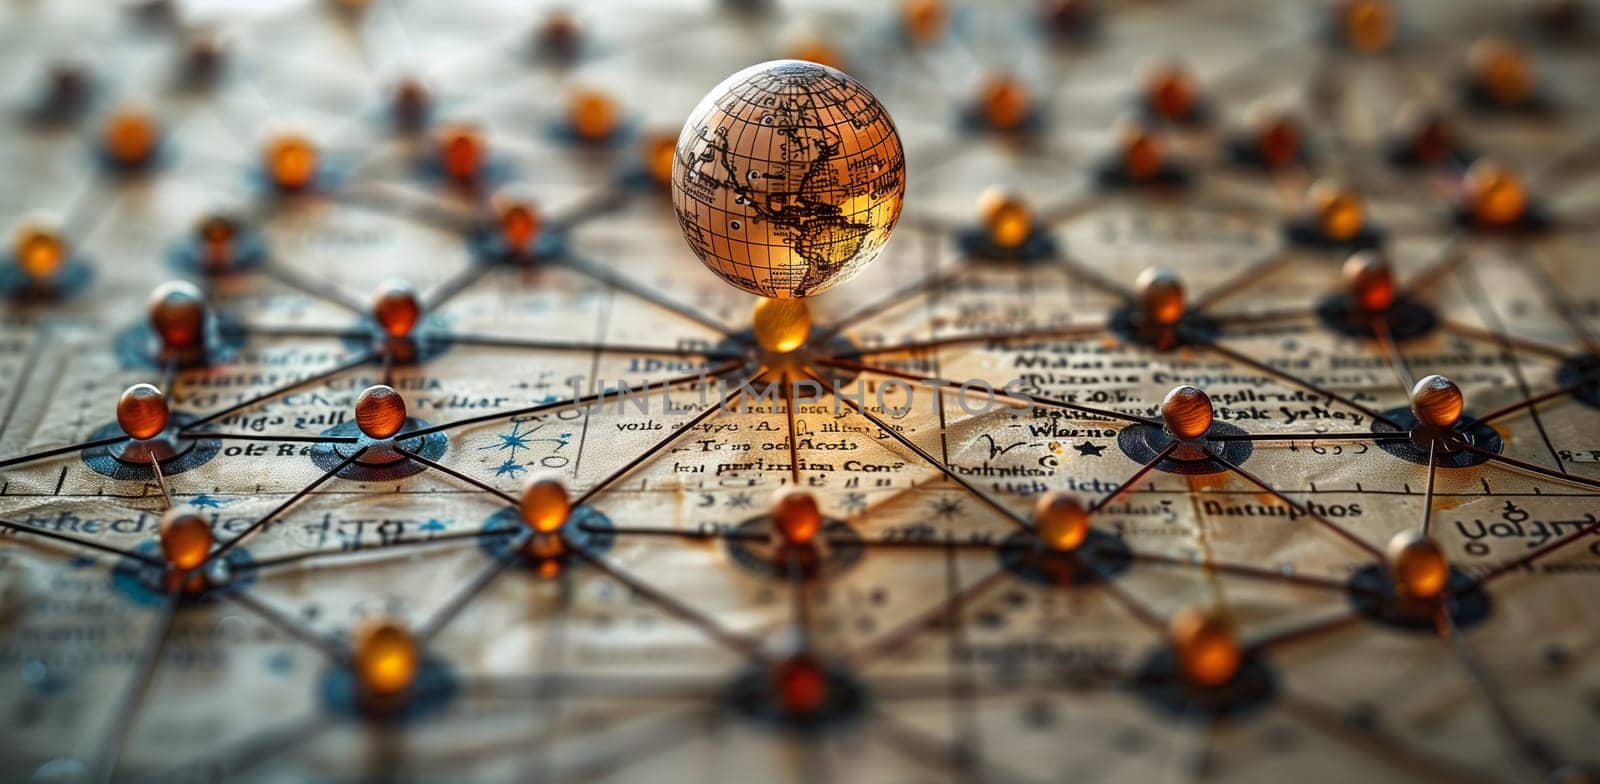 The globe, a fashion accessory made of glass and metal, rests on a map of the world. The symmetry of the circle pattern is captured in a stunning macro photography